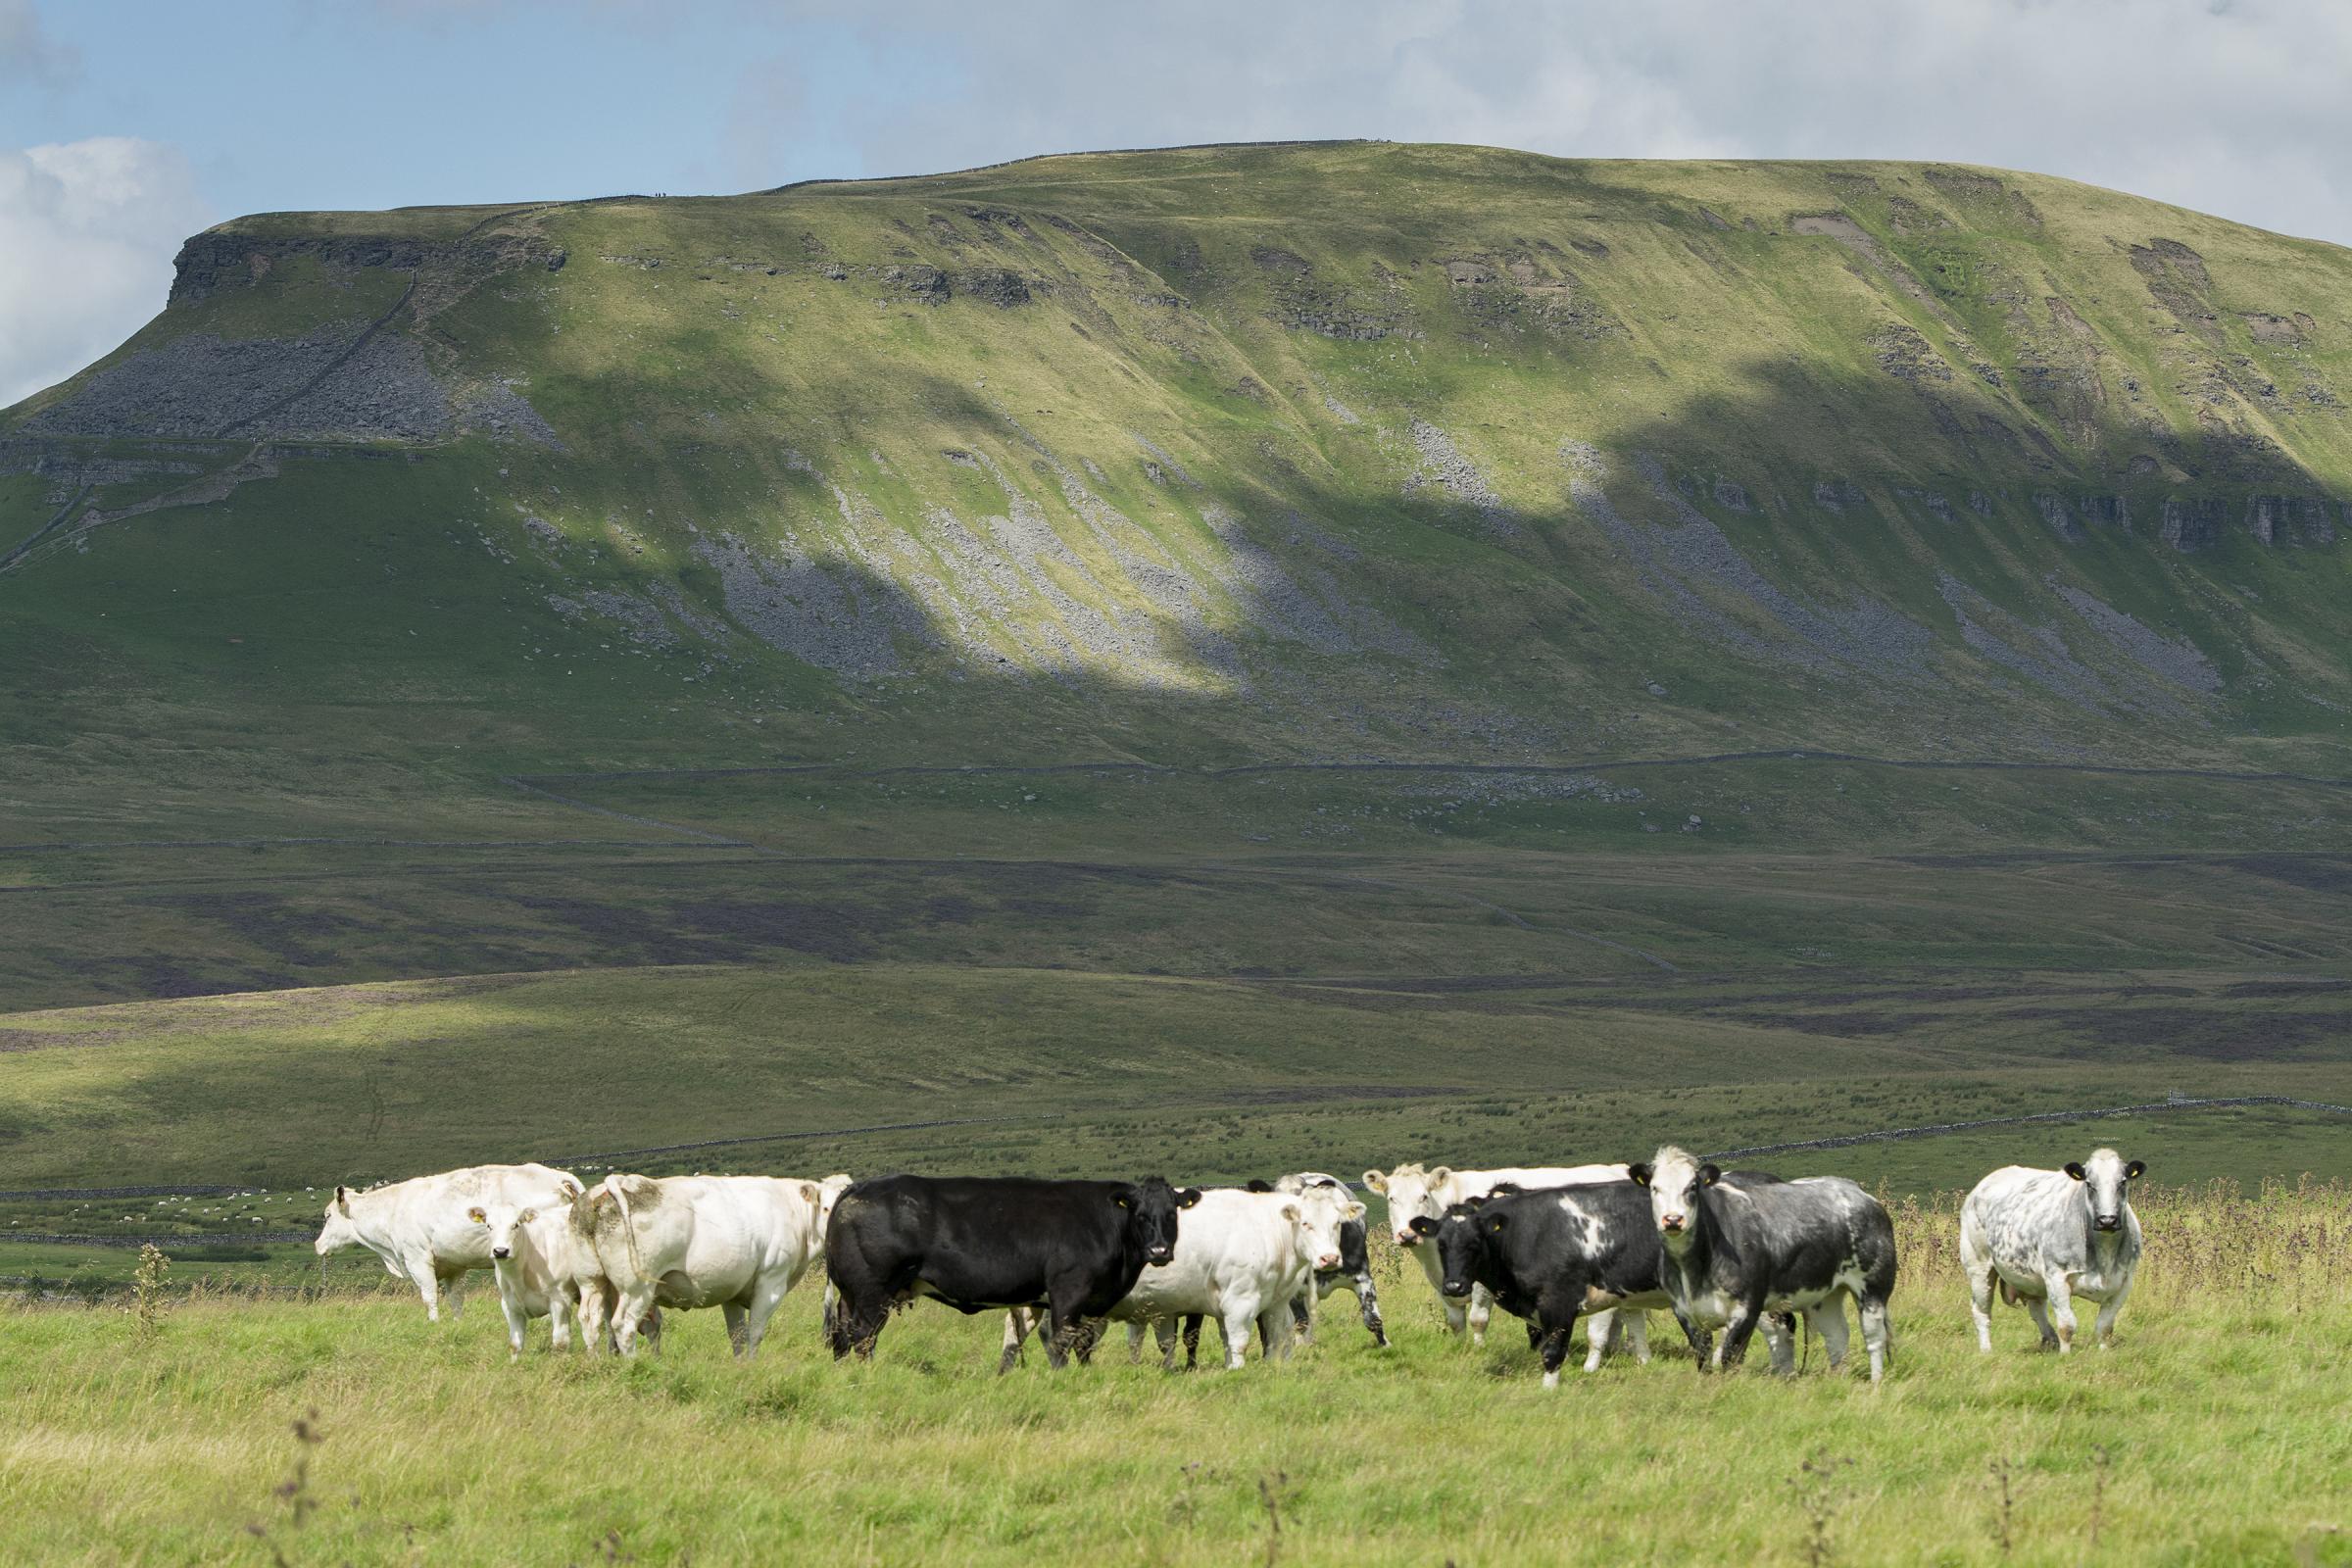 The Greystones herd of pedigree British Blue cattle on upland pasture in North Yorkshire, with Penyghent in background